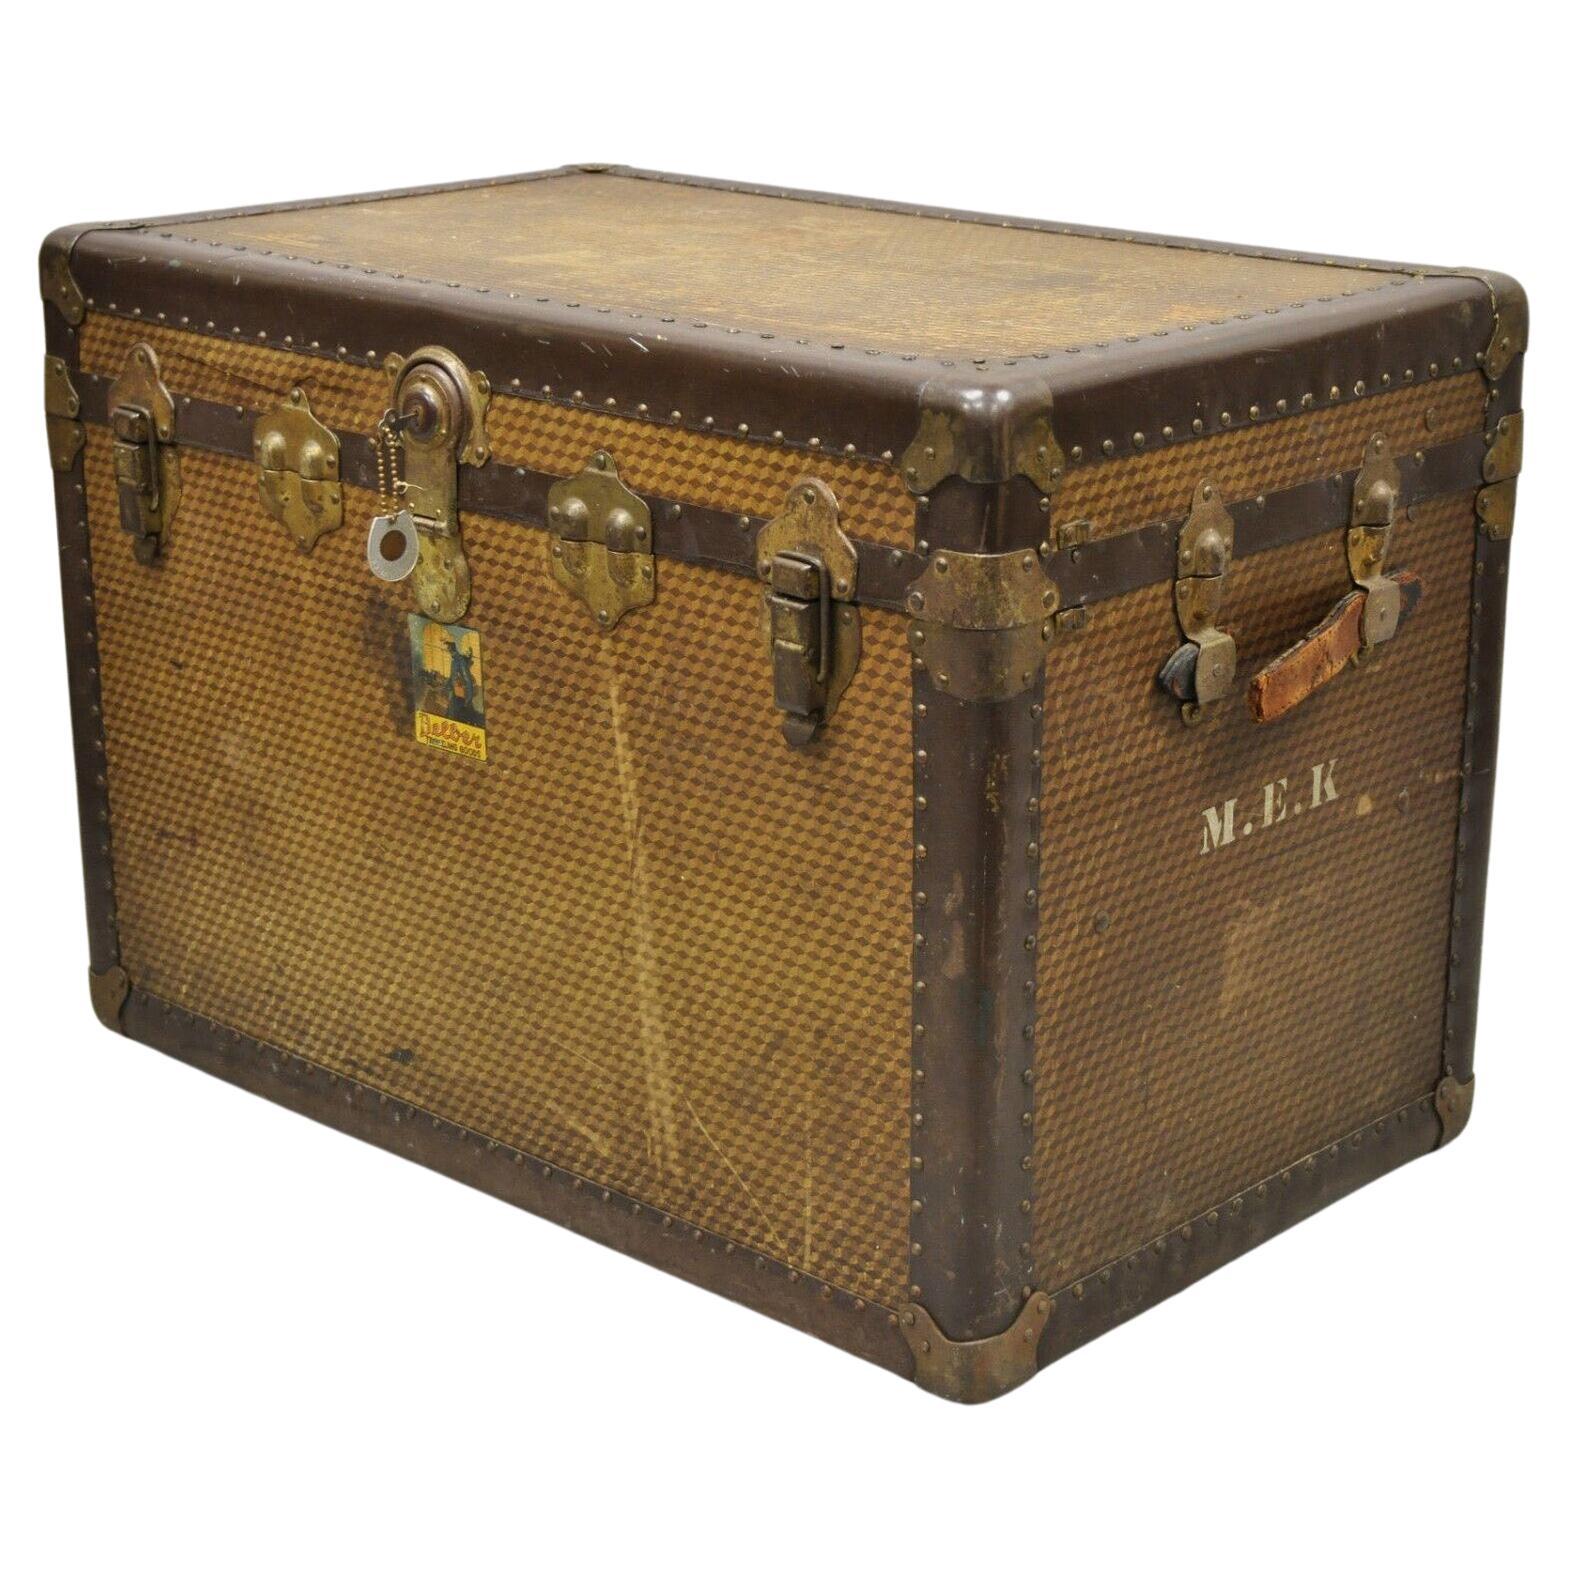 1939 Belber Trunk & Bag Co. foot locker. The leather handles need